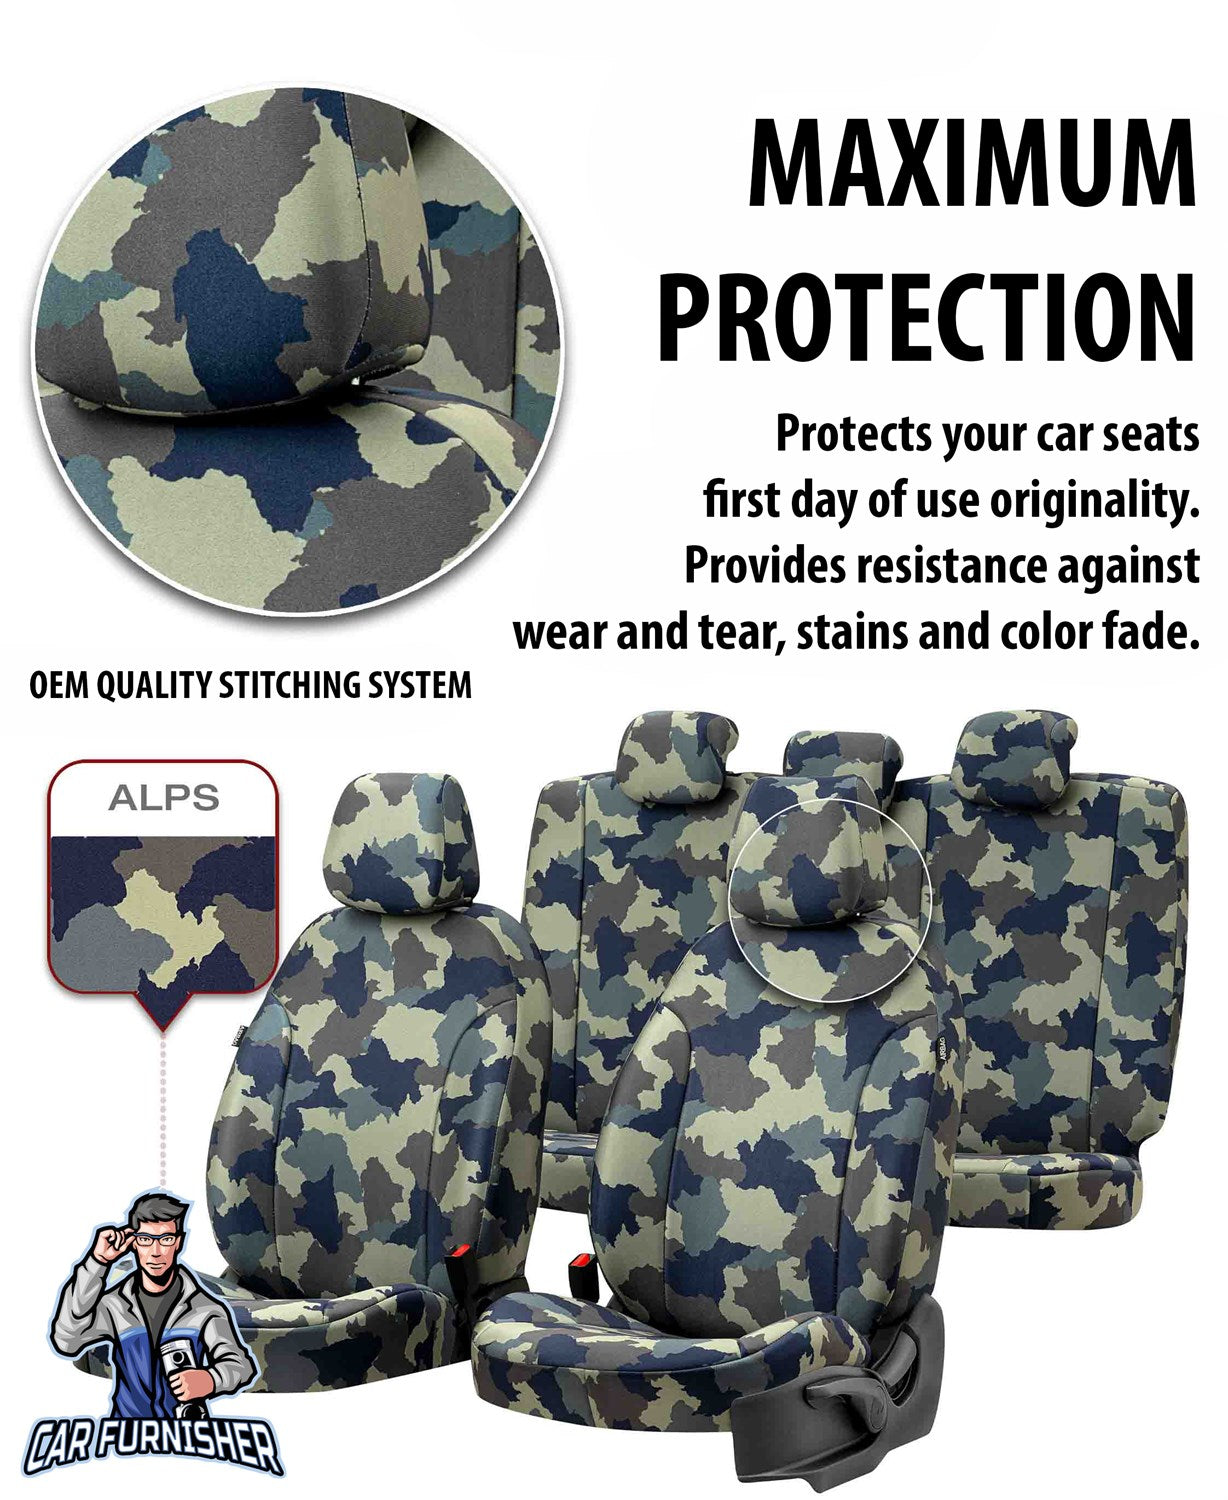 Toyota Auris Seat Cover Camouflage Waterproof Design Montblanc Camo Waterproof Fabric